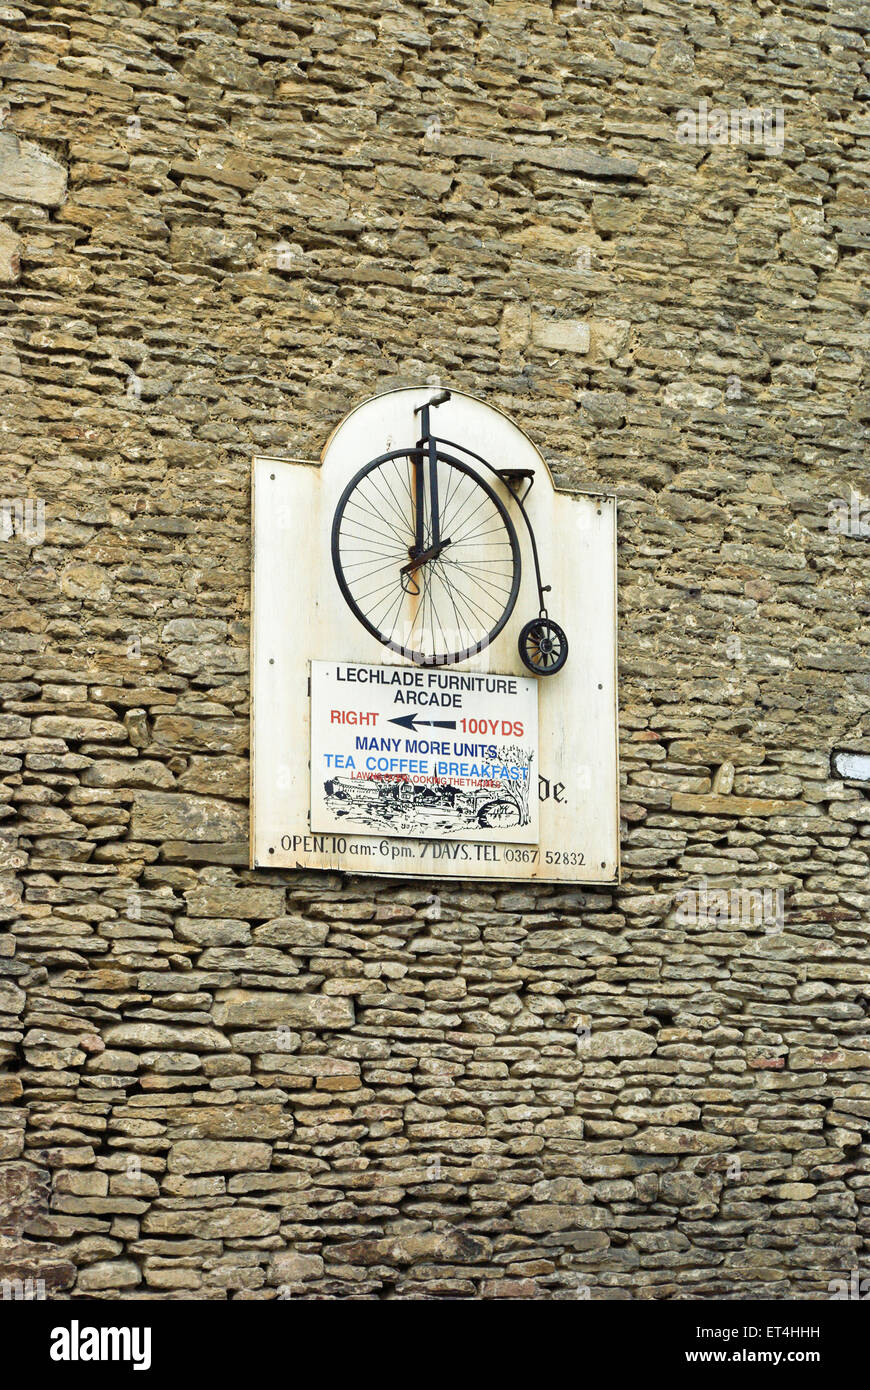 Ornate sign, featuring a metal penny farthing bicycle, advertising Lechlade Furniture Arcade, UK Stock Photo